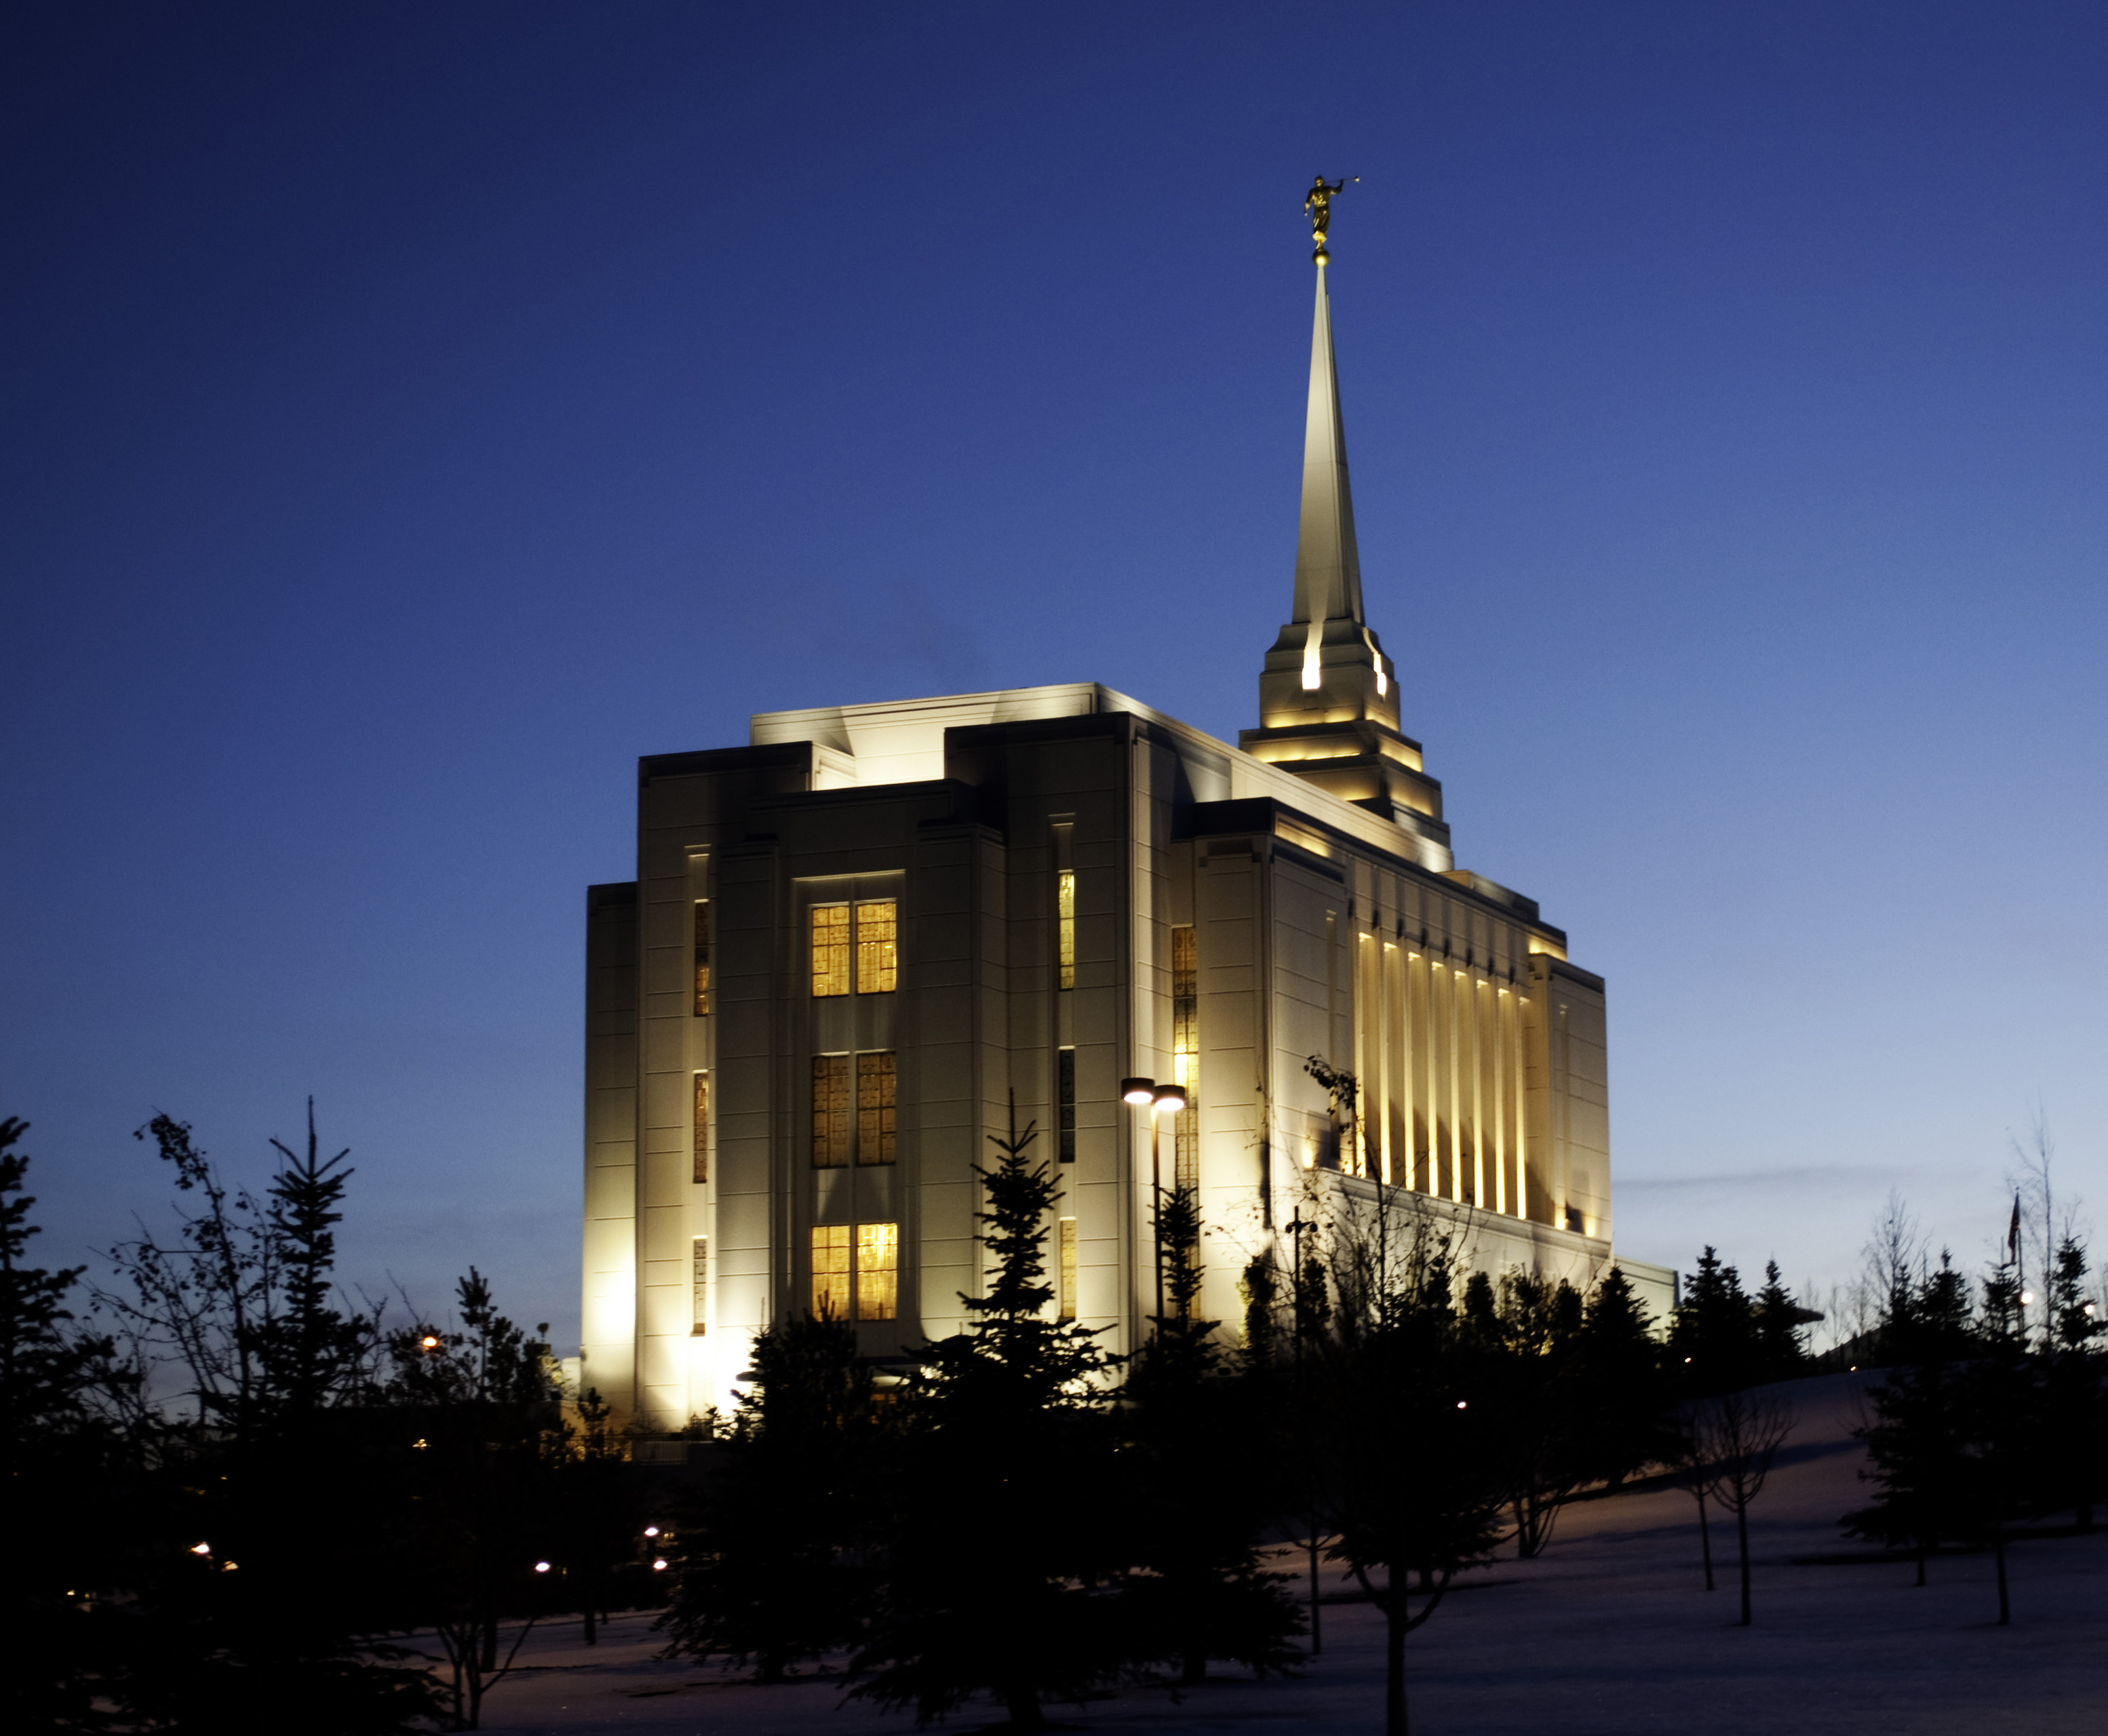 The Rexburg Idaho Temple west side in the evening, including scenery.